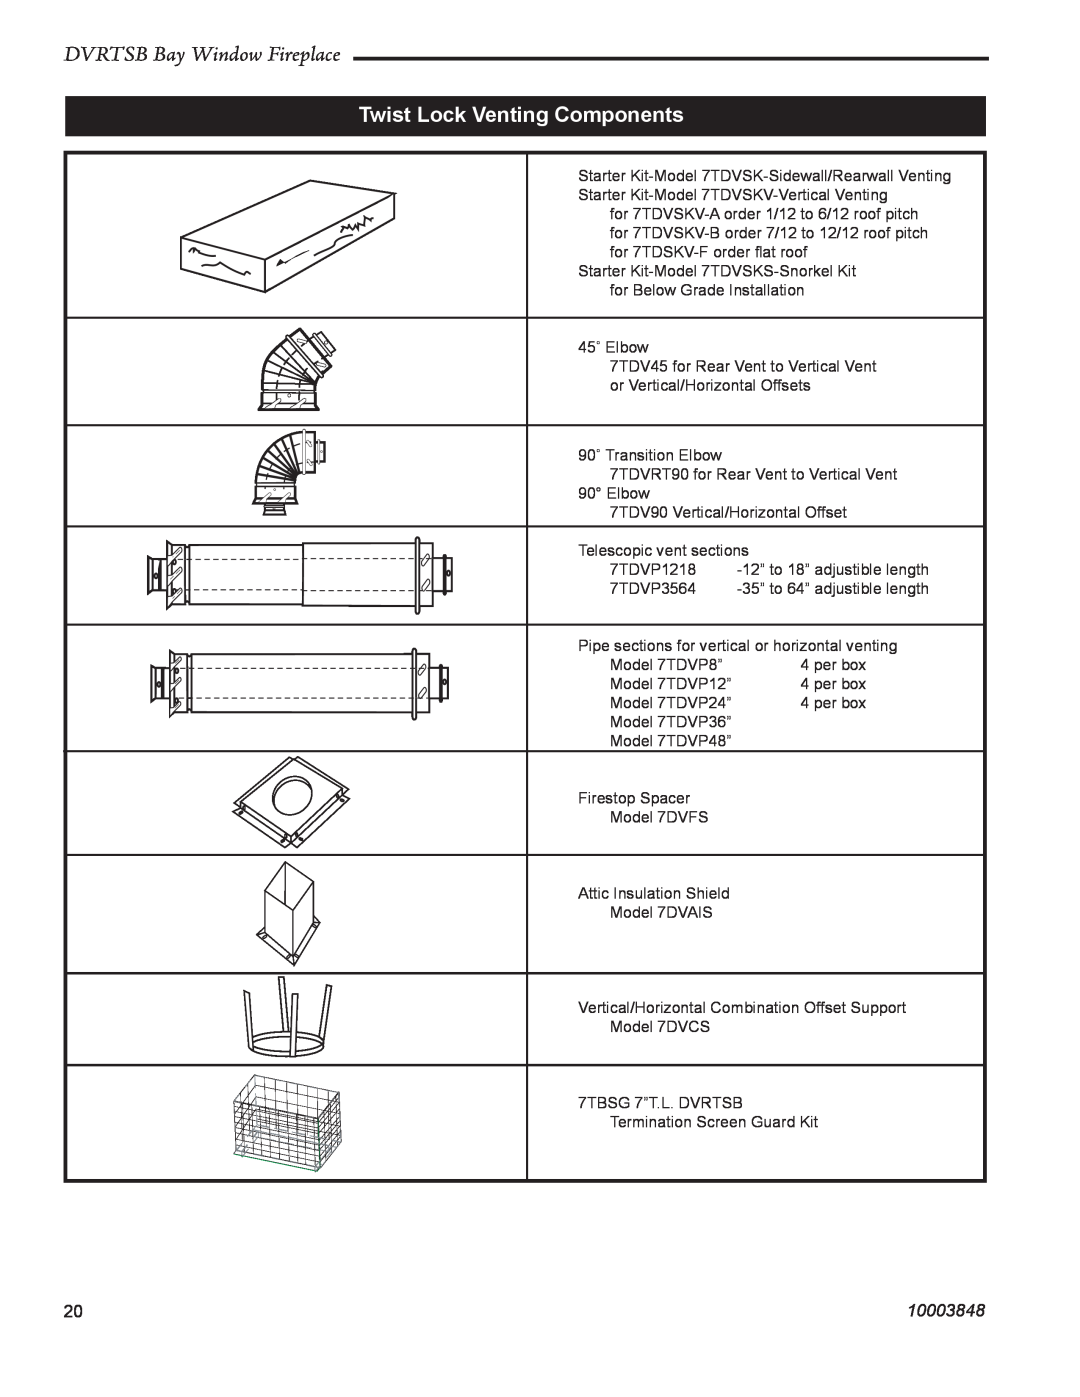 Vermont Casting manual Twist Lock Venting Components, DVRTSB Bay Window Fireplace, 10003848 